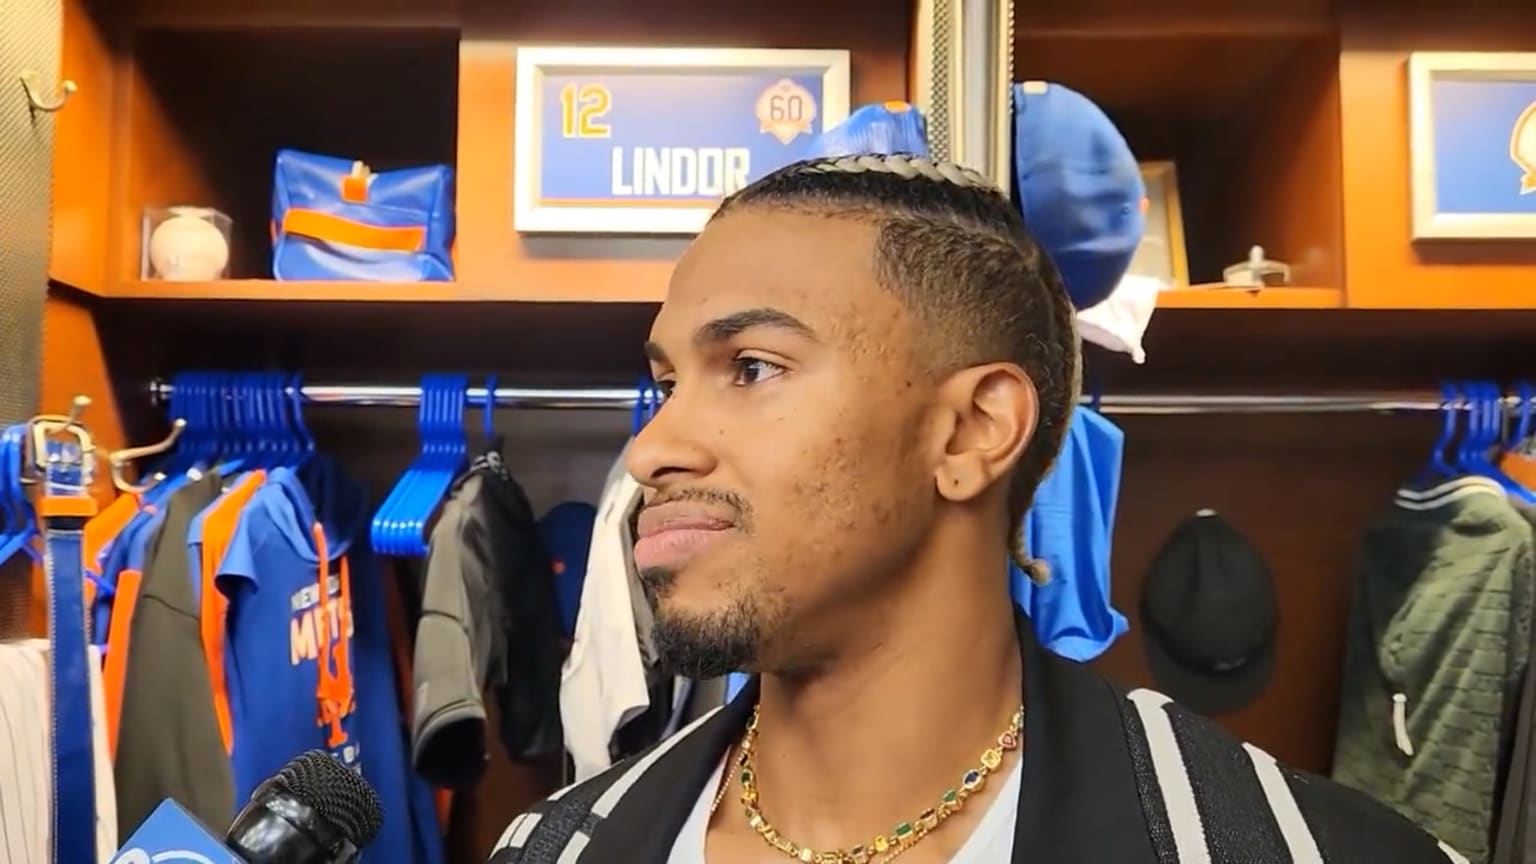 Francisco Lindor rates his teammates' outfits, explains funky hair styles, Mets All-Access